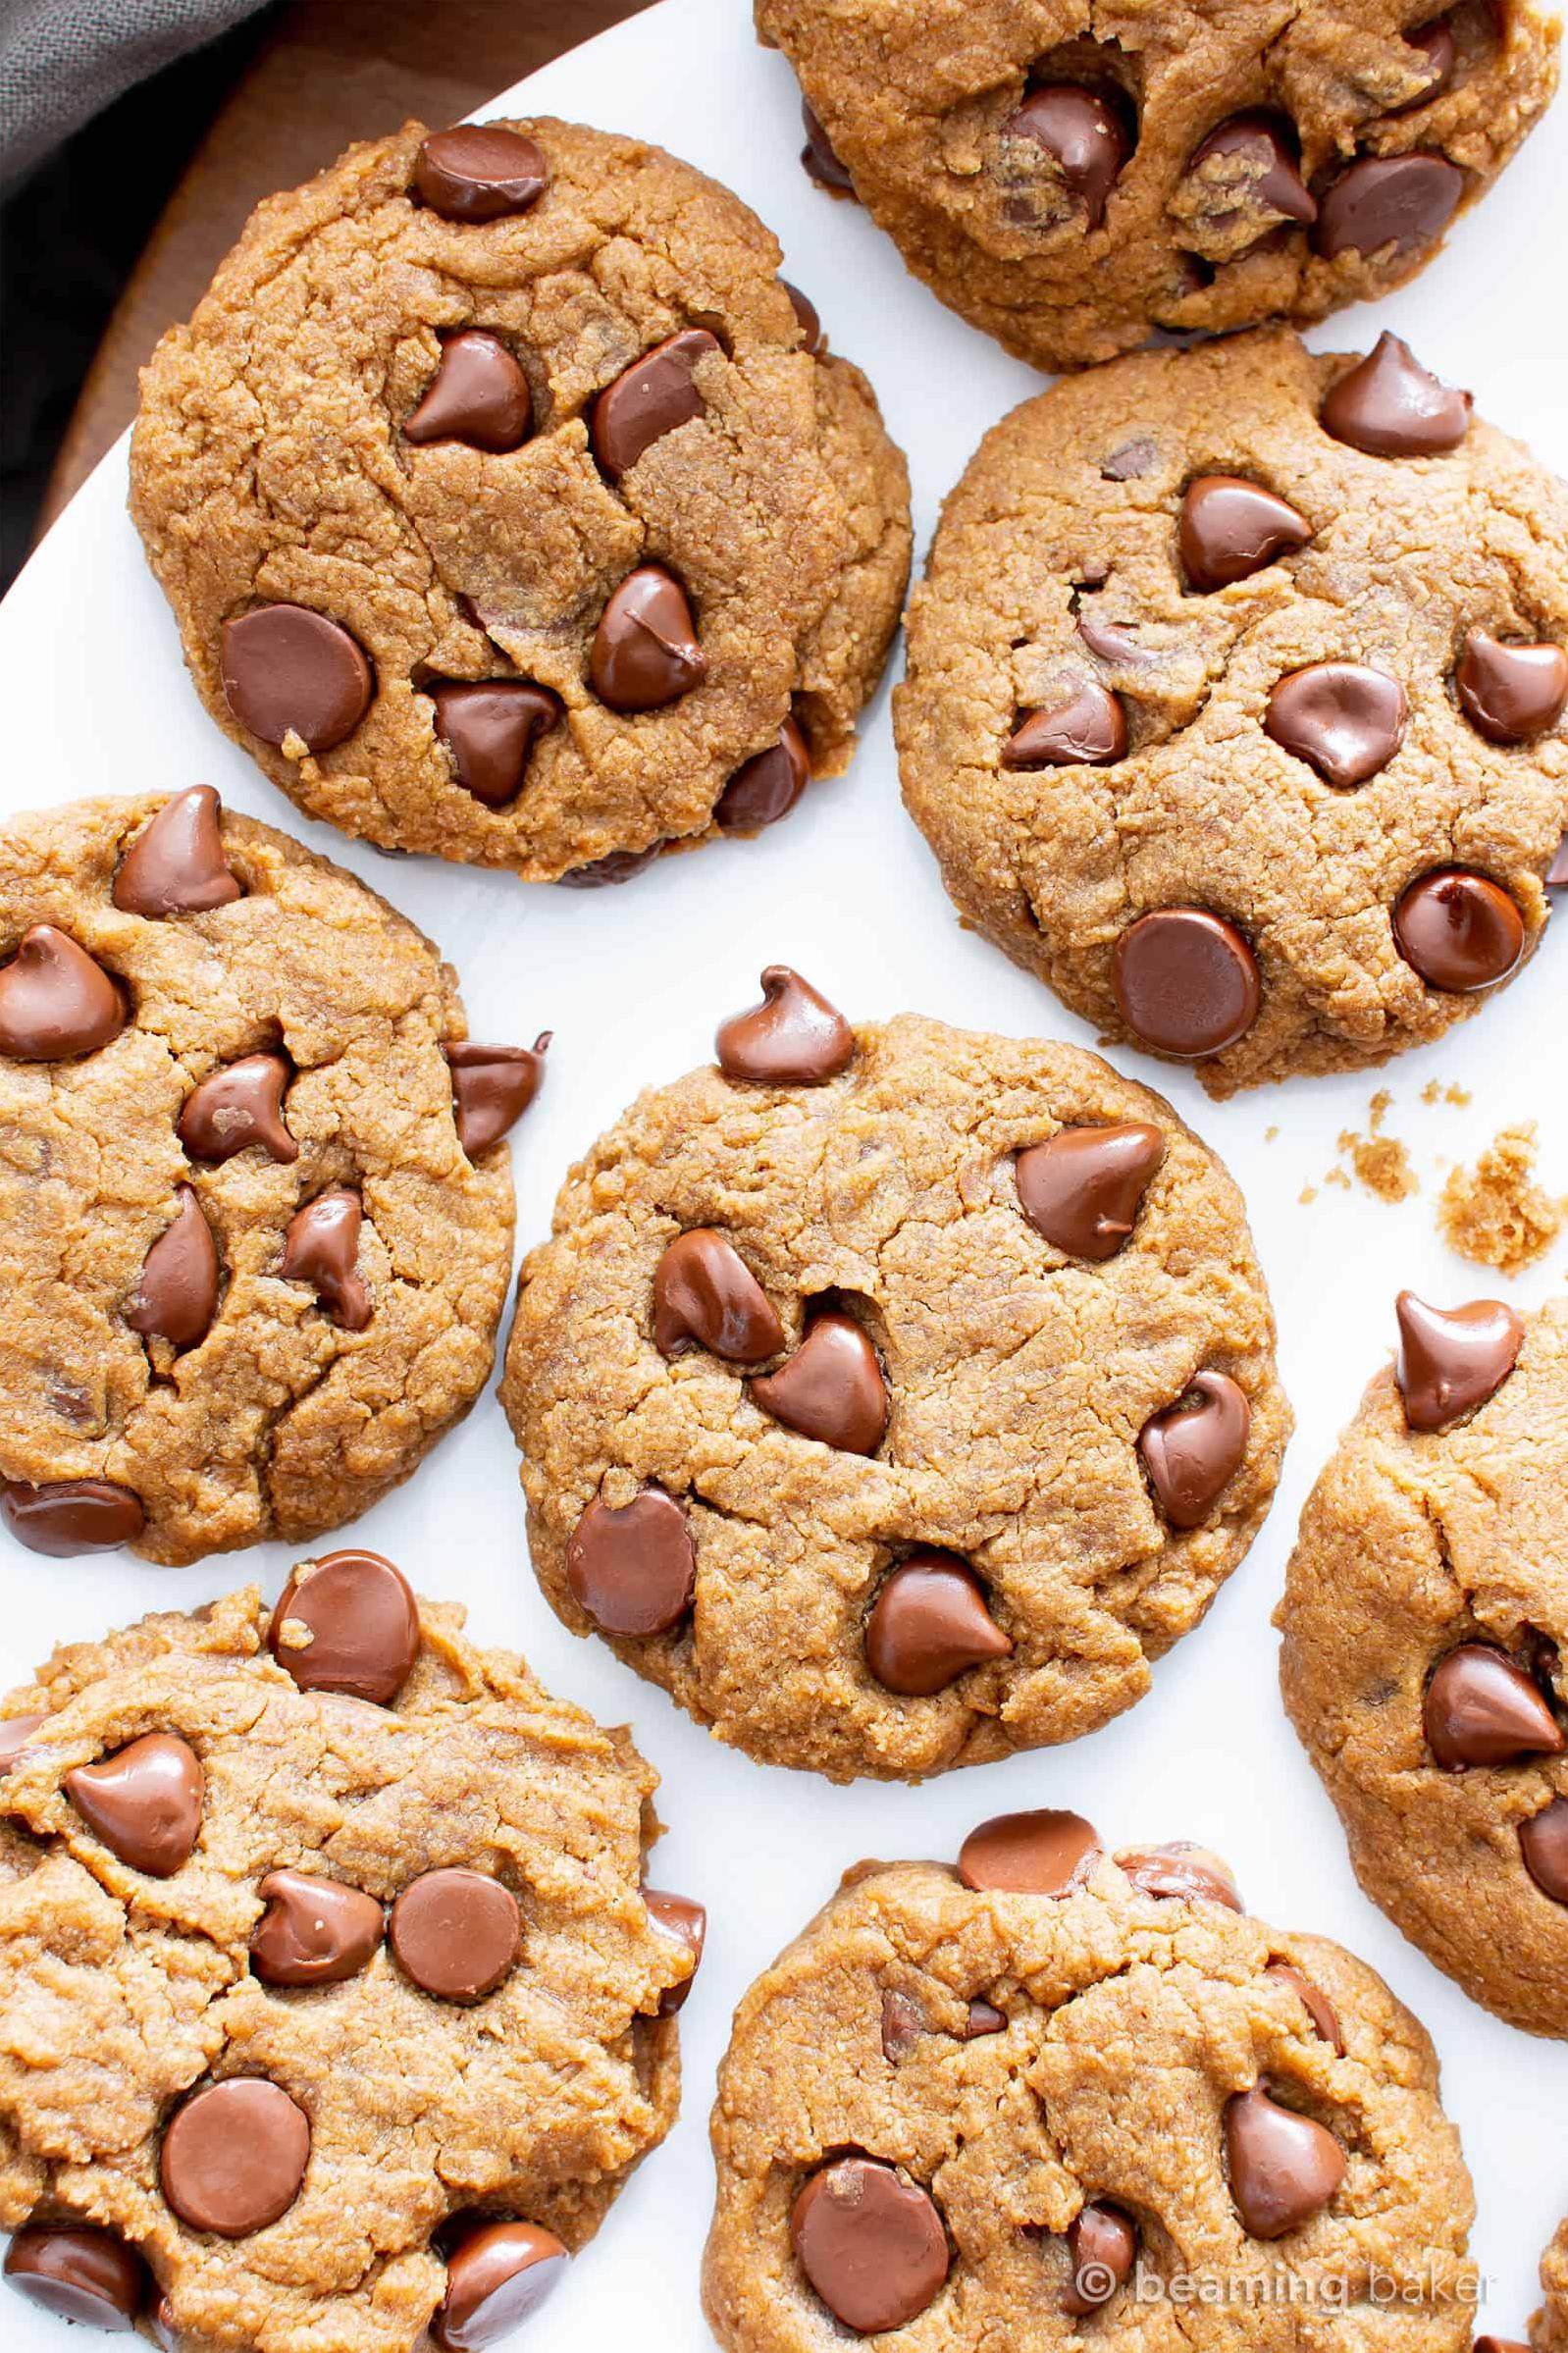  Nothing beats the simple pleasures of eating a warm chocolate chip peanut butter cookie – it's the ultimate comfort food!